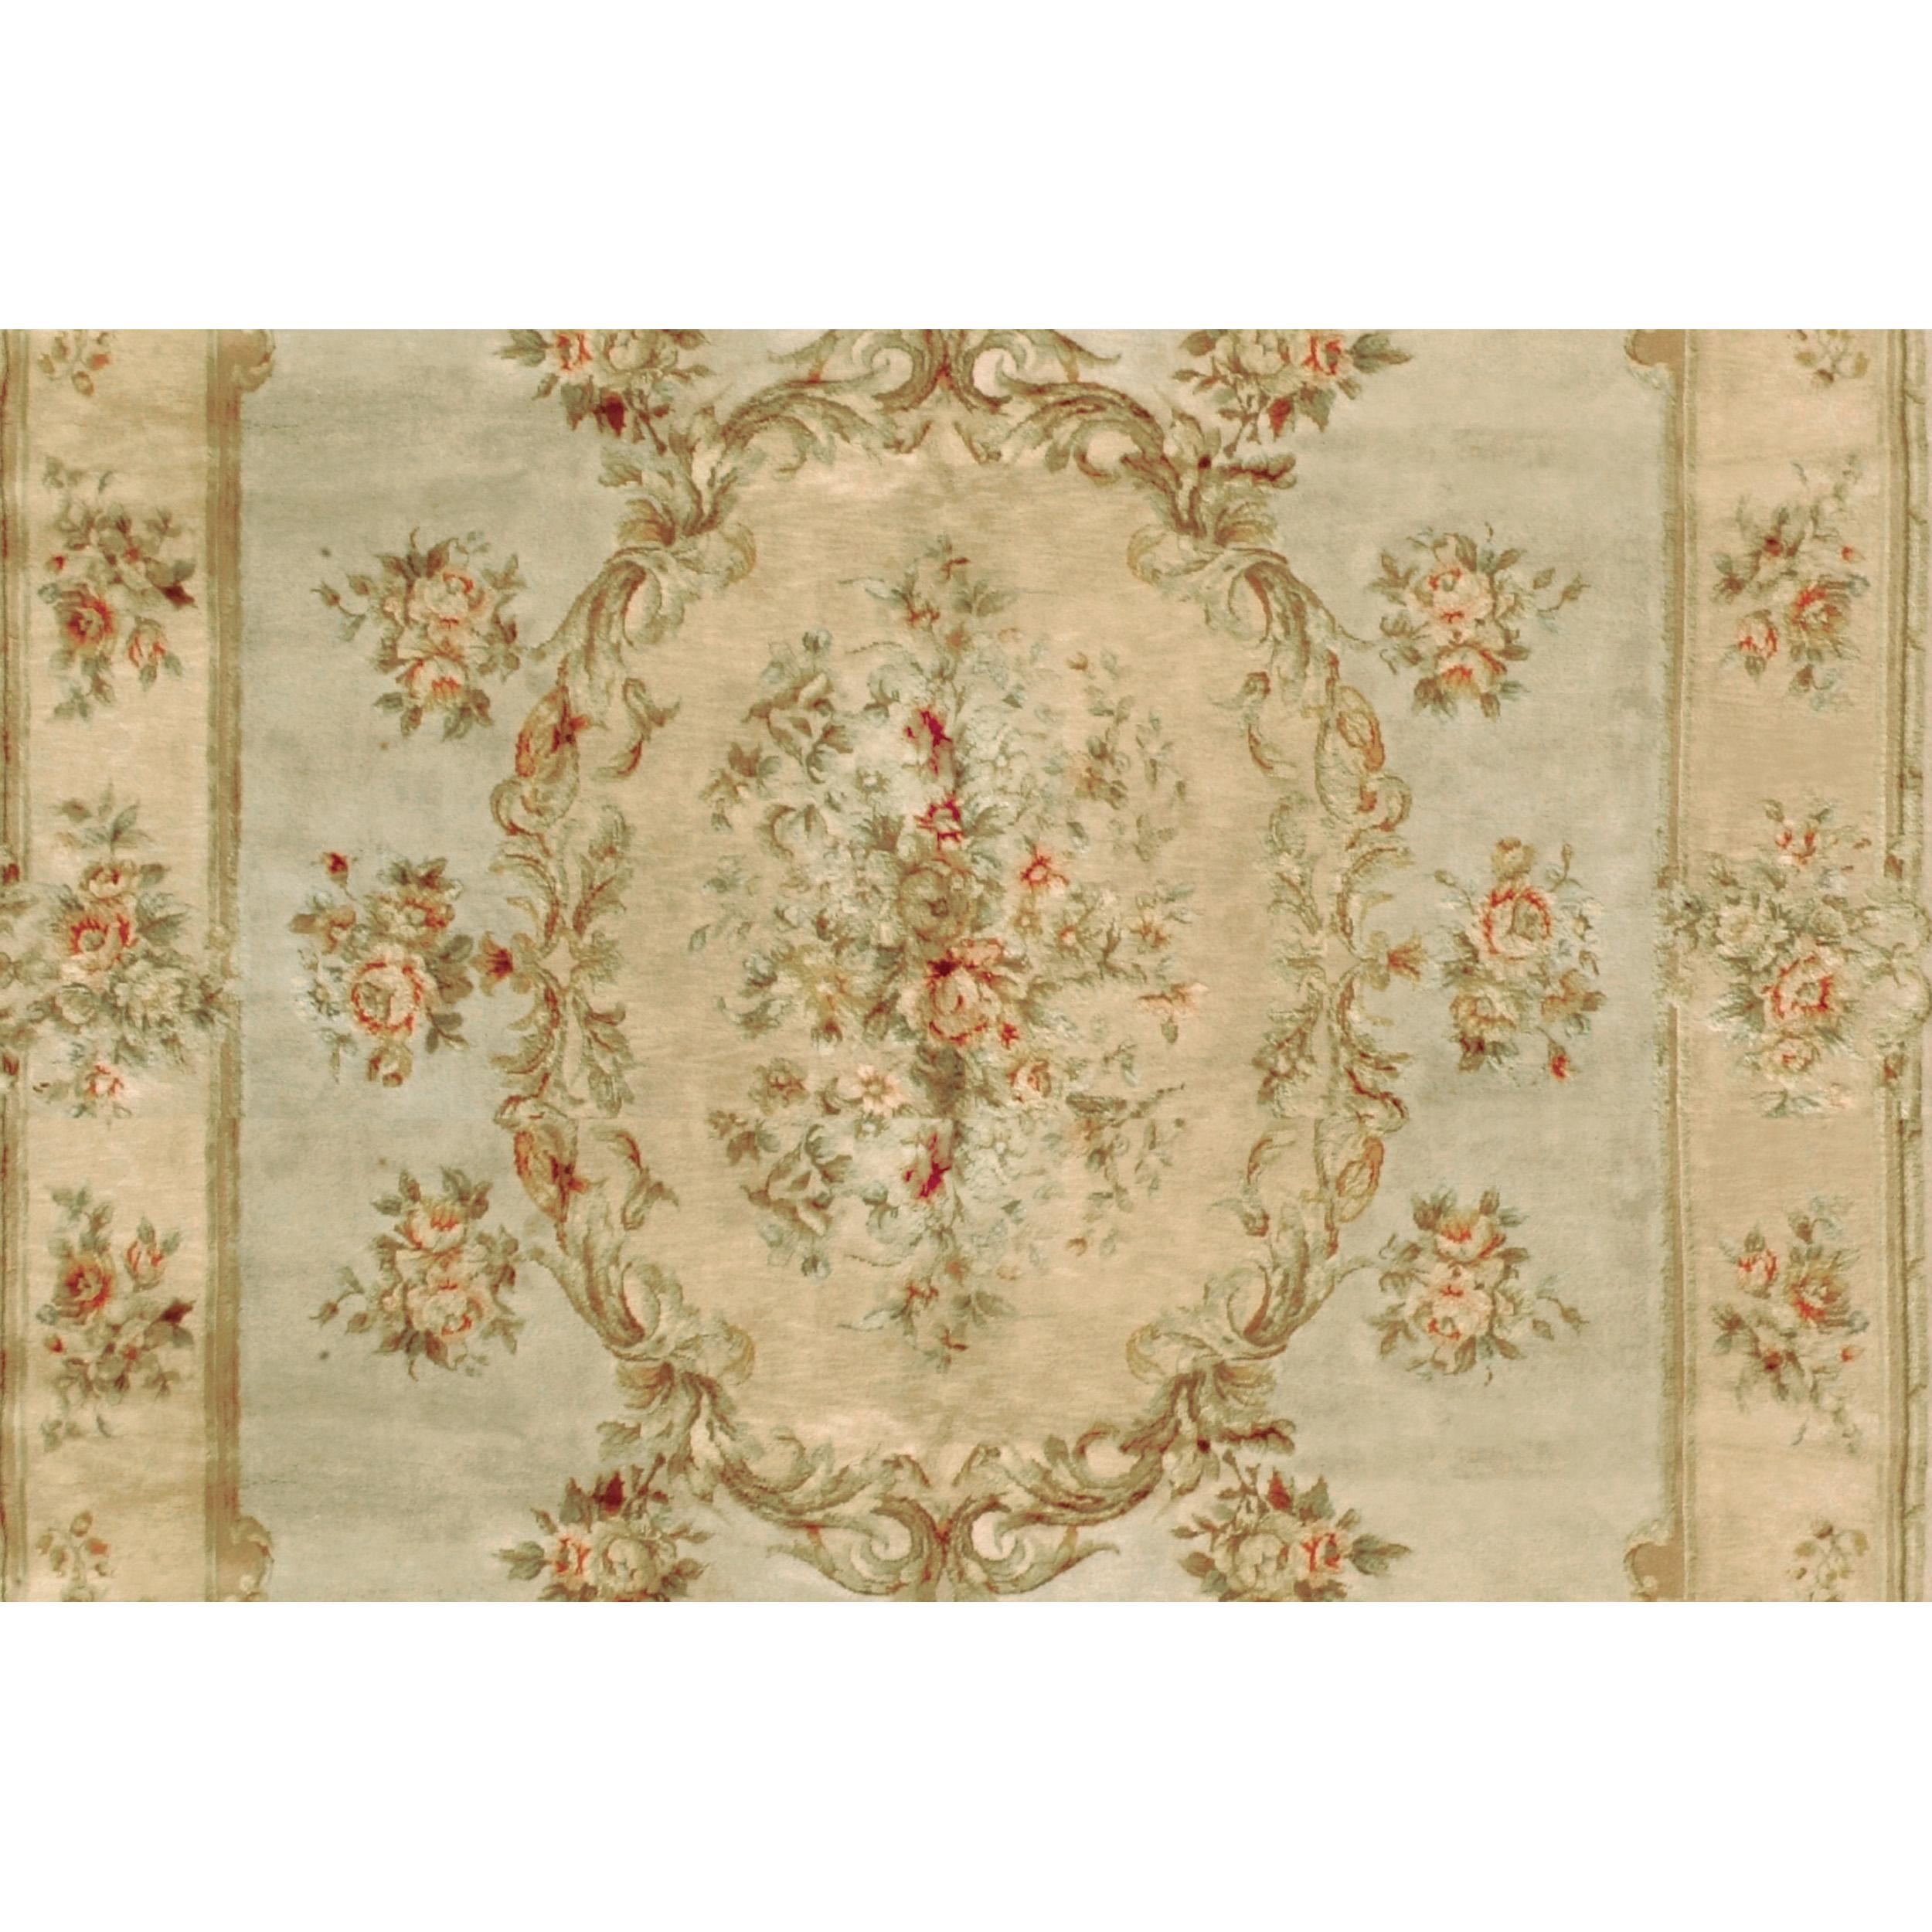 Chinese Luxury European Hand-Knotted Belvoir Celadon/Bisque 10x14 Rug For Sale